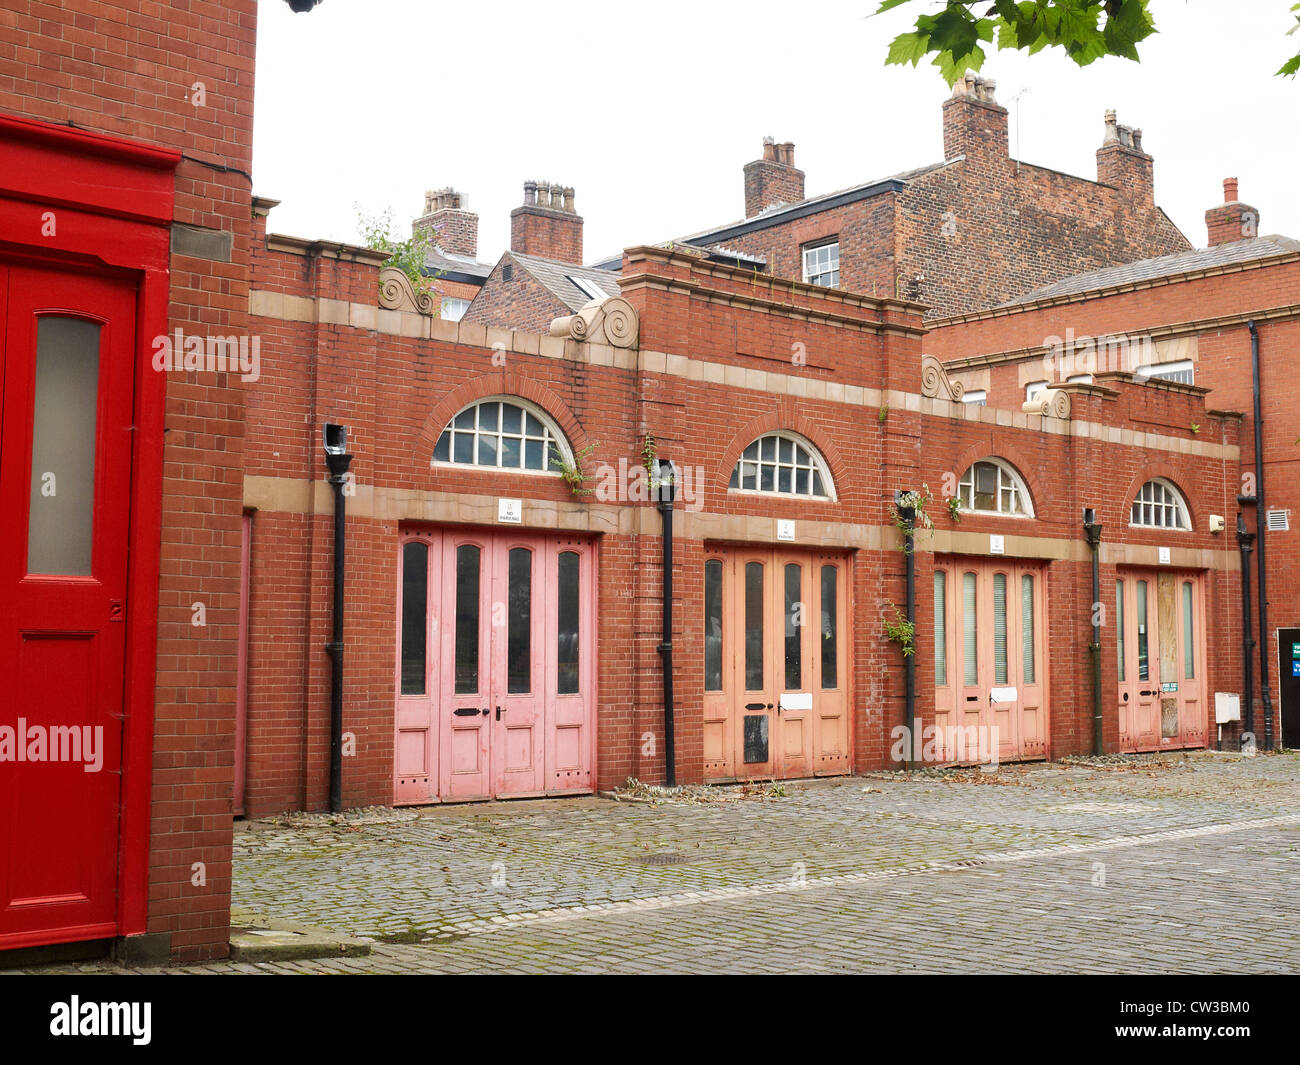 Fire engine garages at The Old Fire Station, part of University of Salford UK Stock Photo